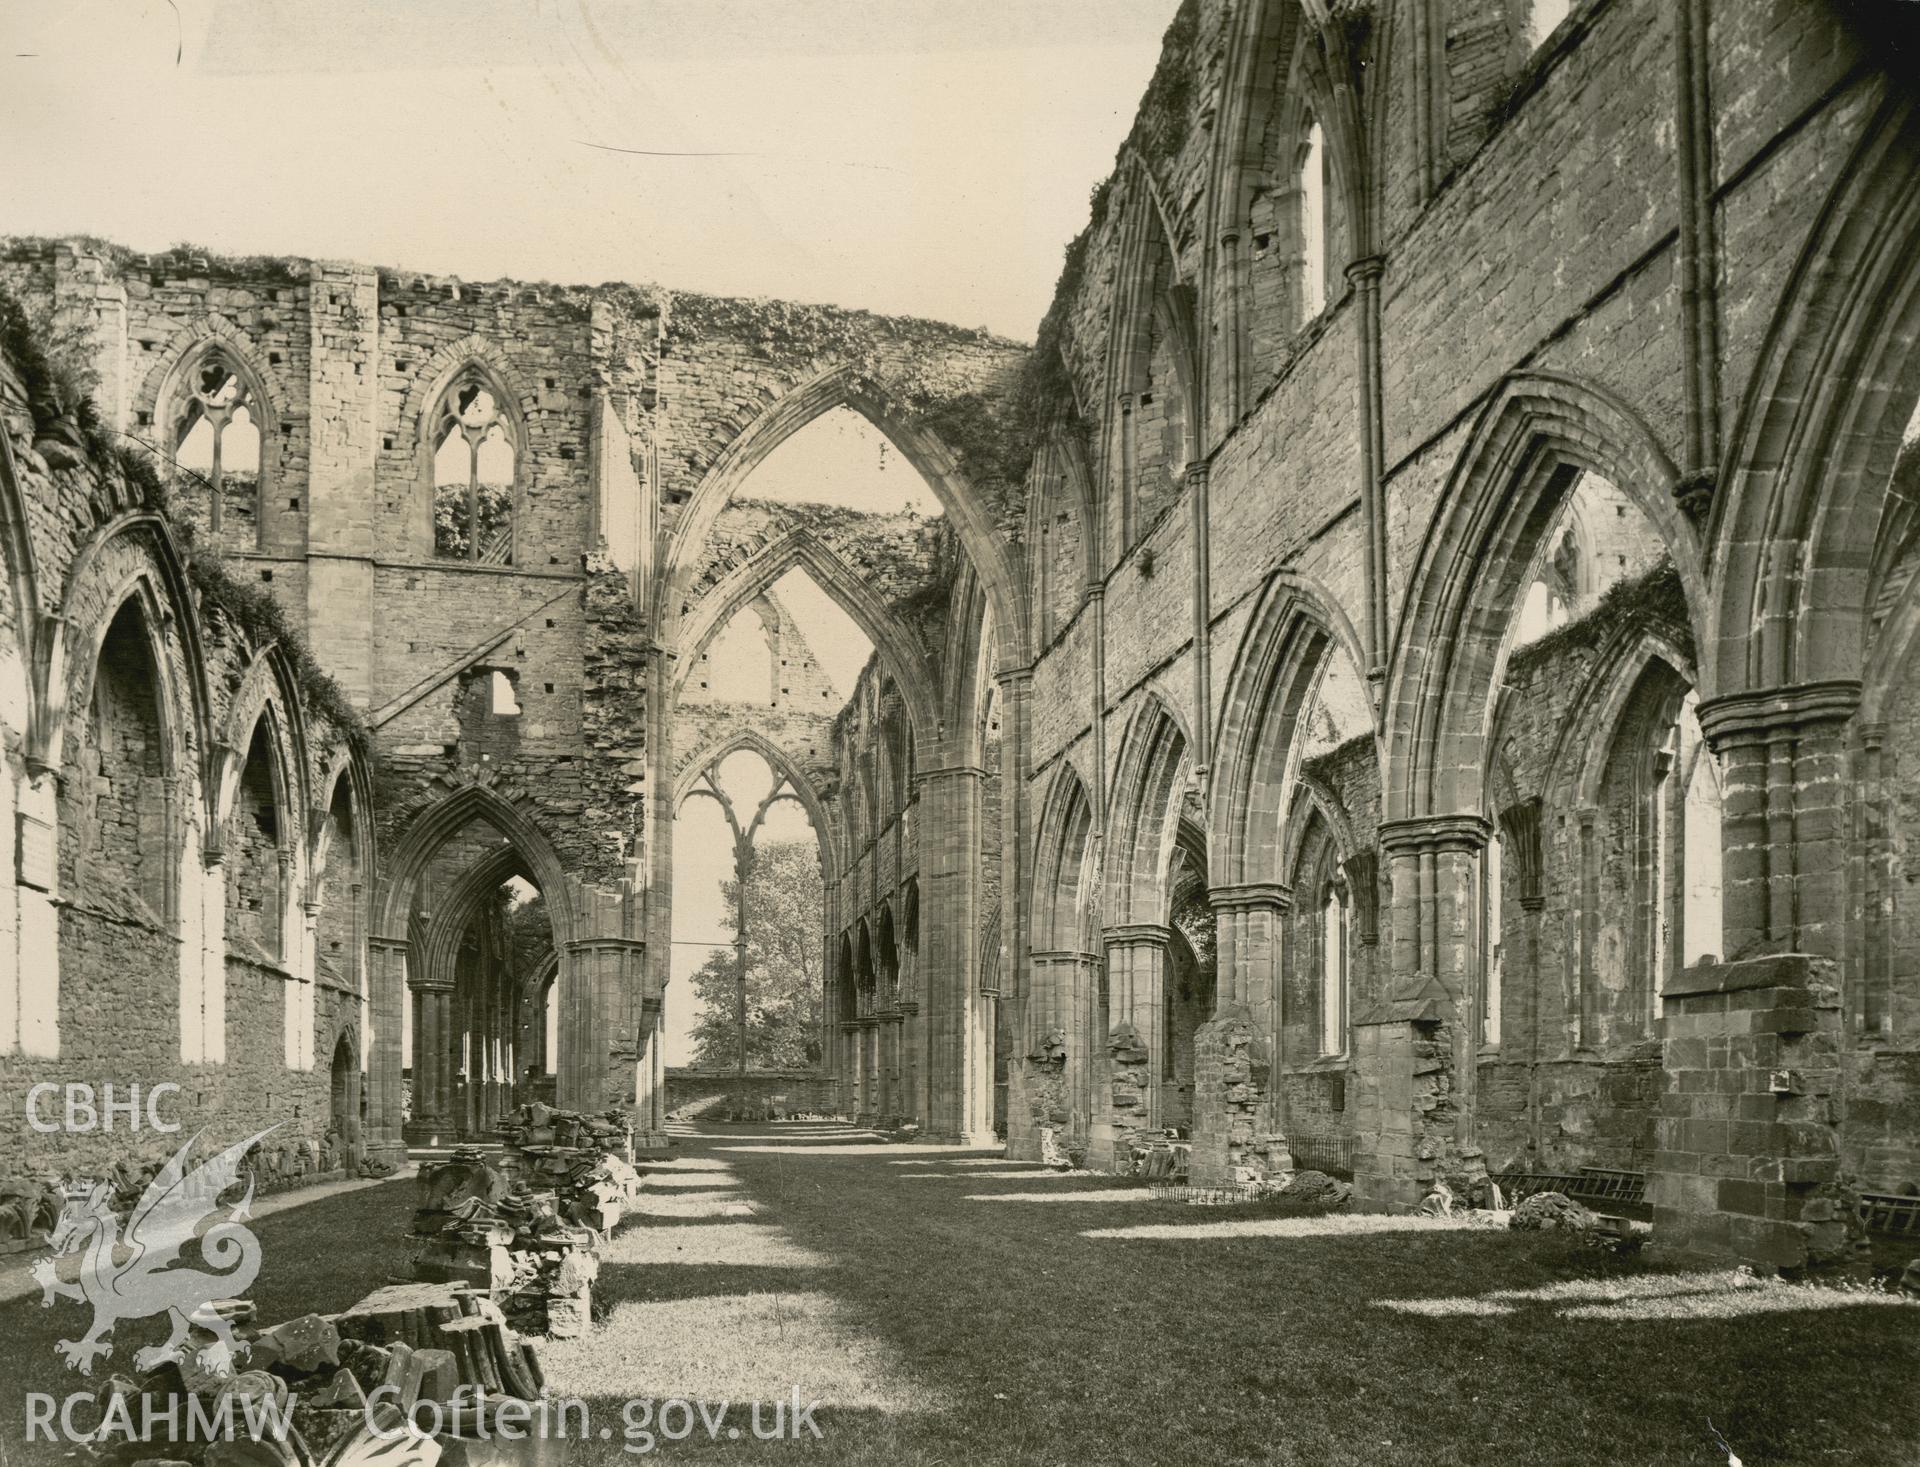 Digital copy of an early National Buildings Record photograph showing an interior view of Tintern Abbey looking east.